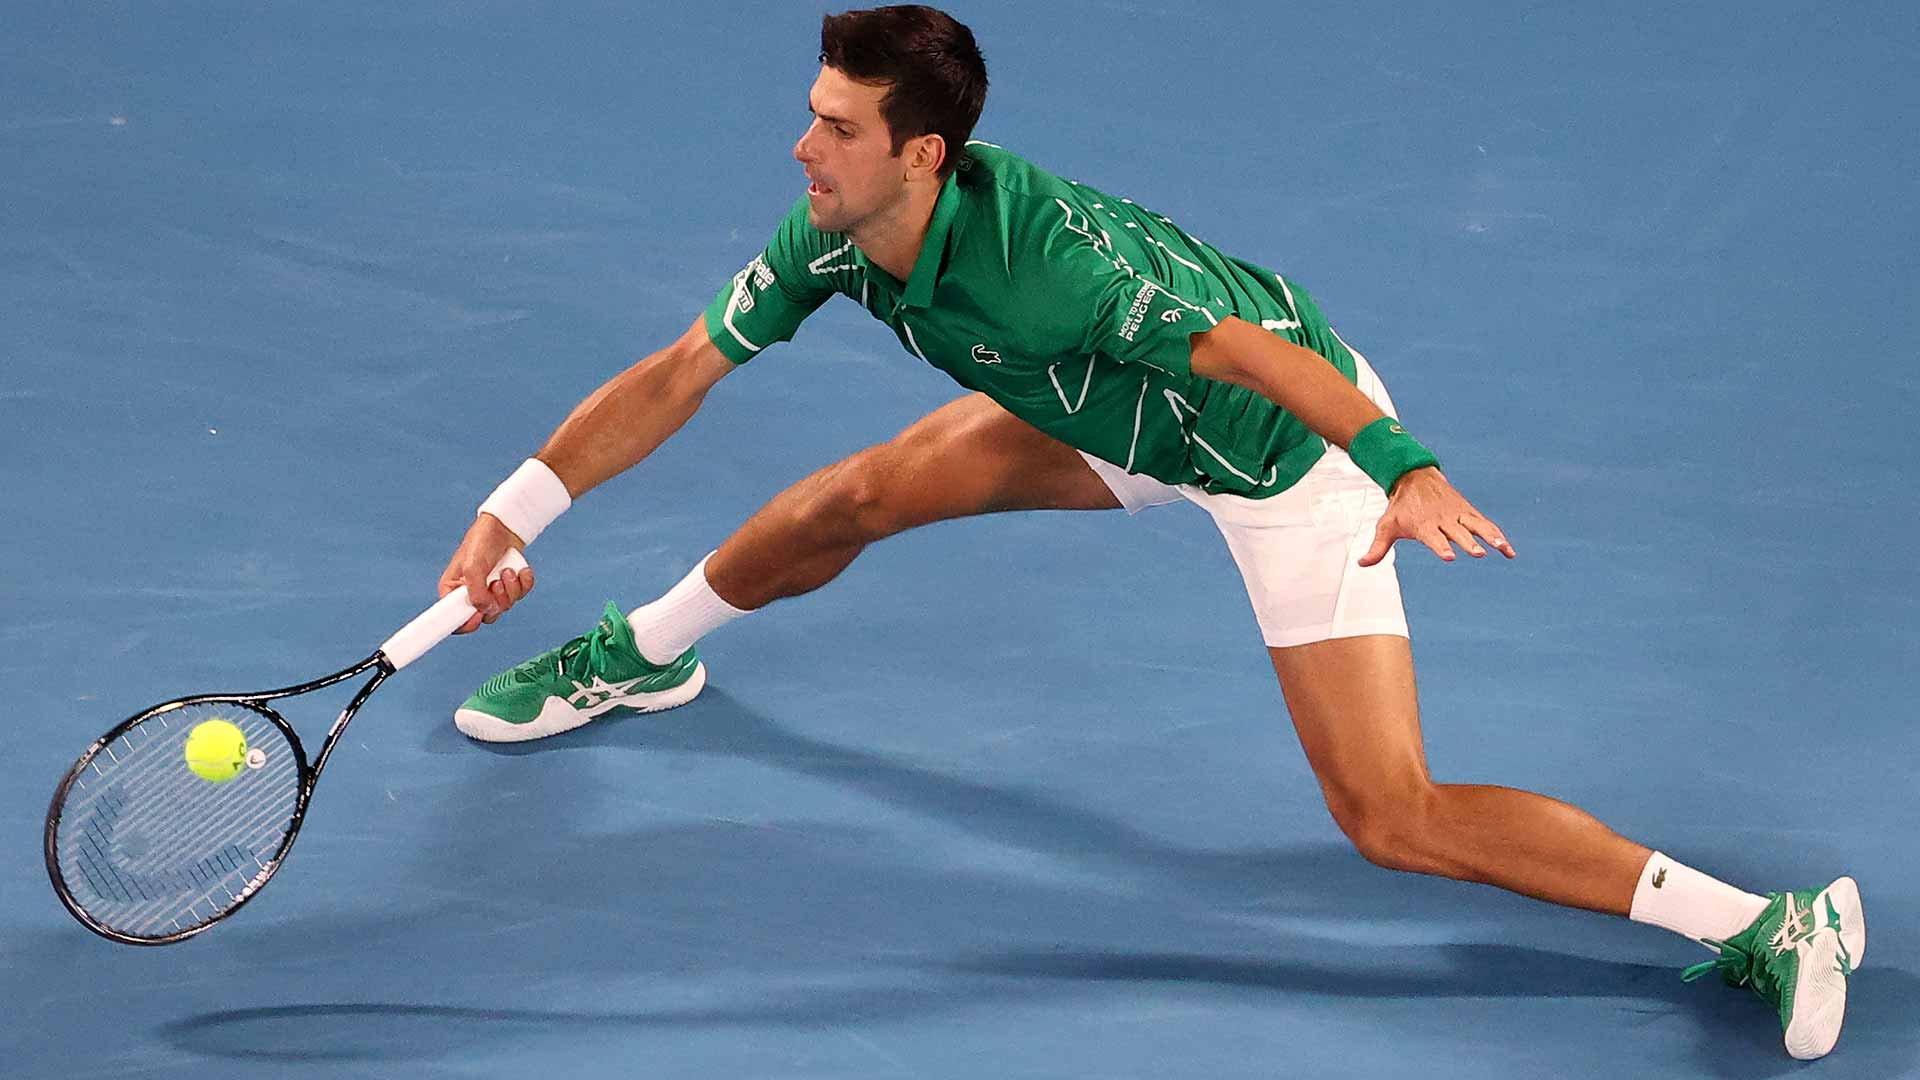 <a href='https://www.atptour.com/en/players/novak-djokovic/d643/overview'>Novak Djokovic</a> is going for his 17th major title on Sunday at the <a href='https://www.atptour.com/en/tournaments/australian-open/580/overview'>Australian Open</a>.